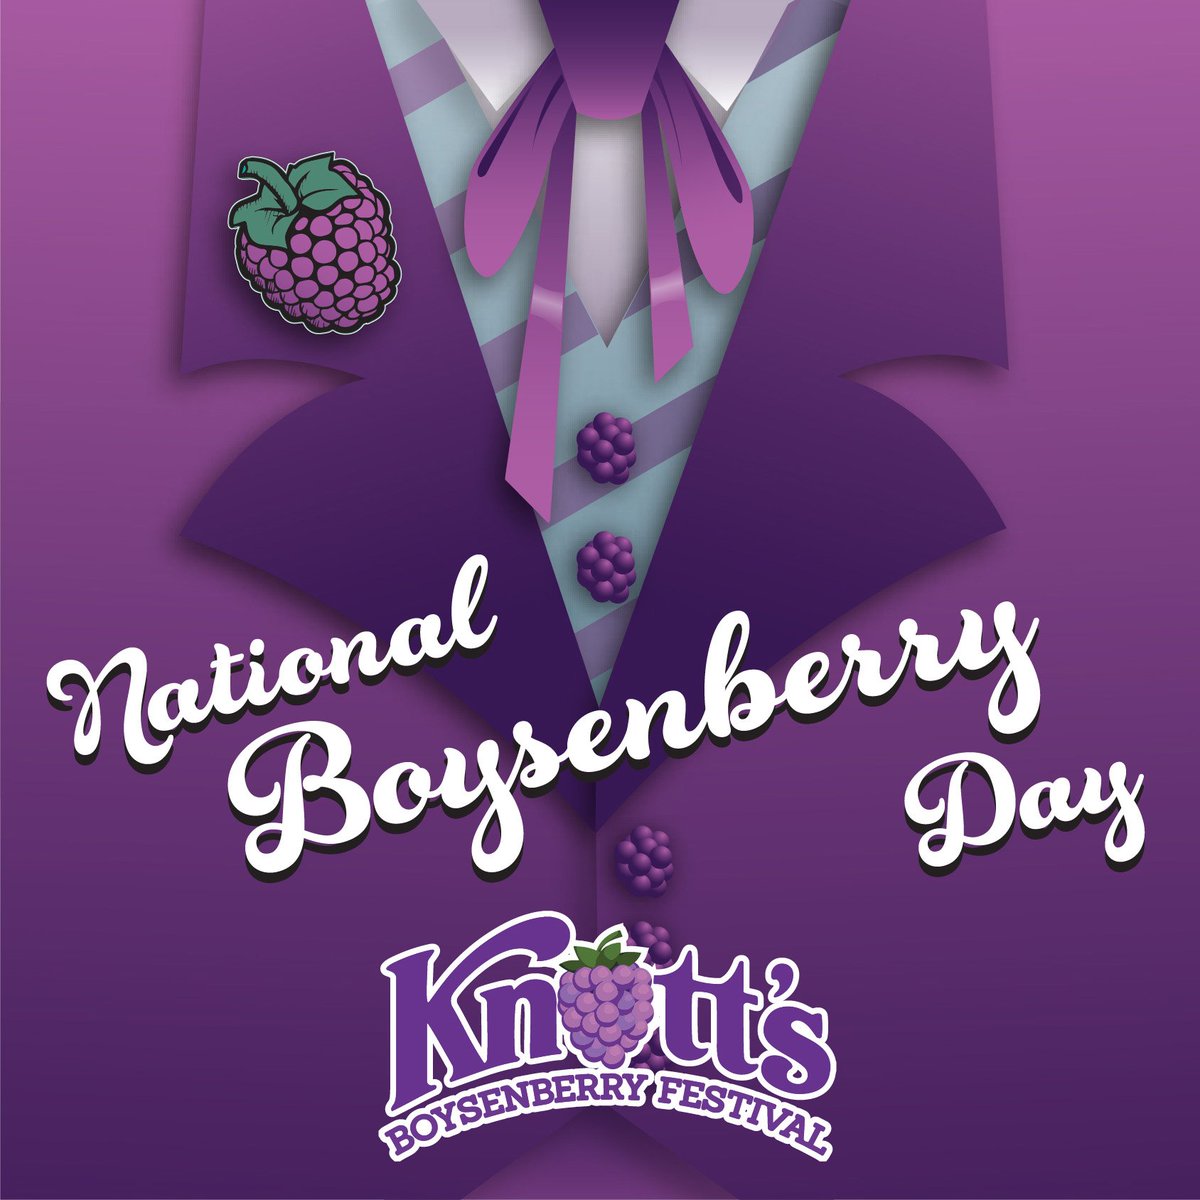 Dress your #BerryBest at the #KnottsBoysenberryFestival on National Boysenberry Day, April 3, 2019! Join the #BerryBest dressed competition at 4 p.m. on the Calico Mine Stage to win a boysenberry inspired prize! Our friend @Atomic_Redhead has some great inspiration for you.